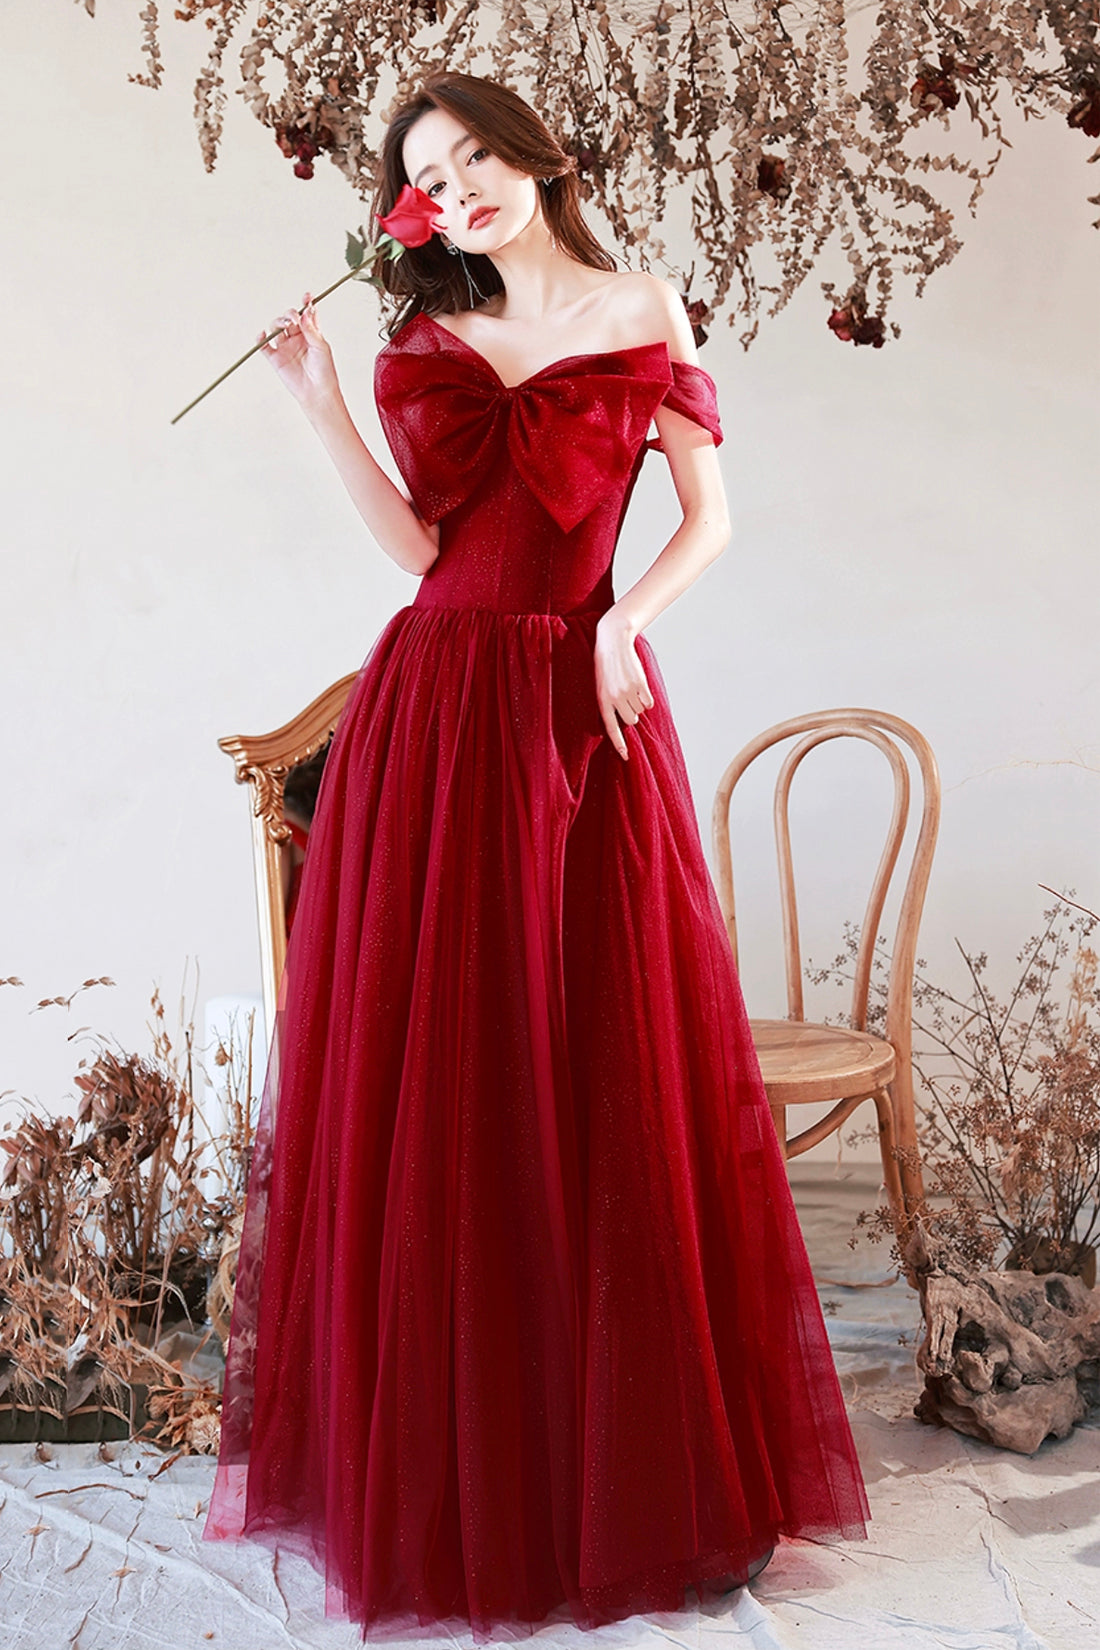 Burgundy Tulle Long A-Line Prom Dress with Bow, Burgundy Evening Graduation Dress